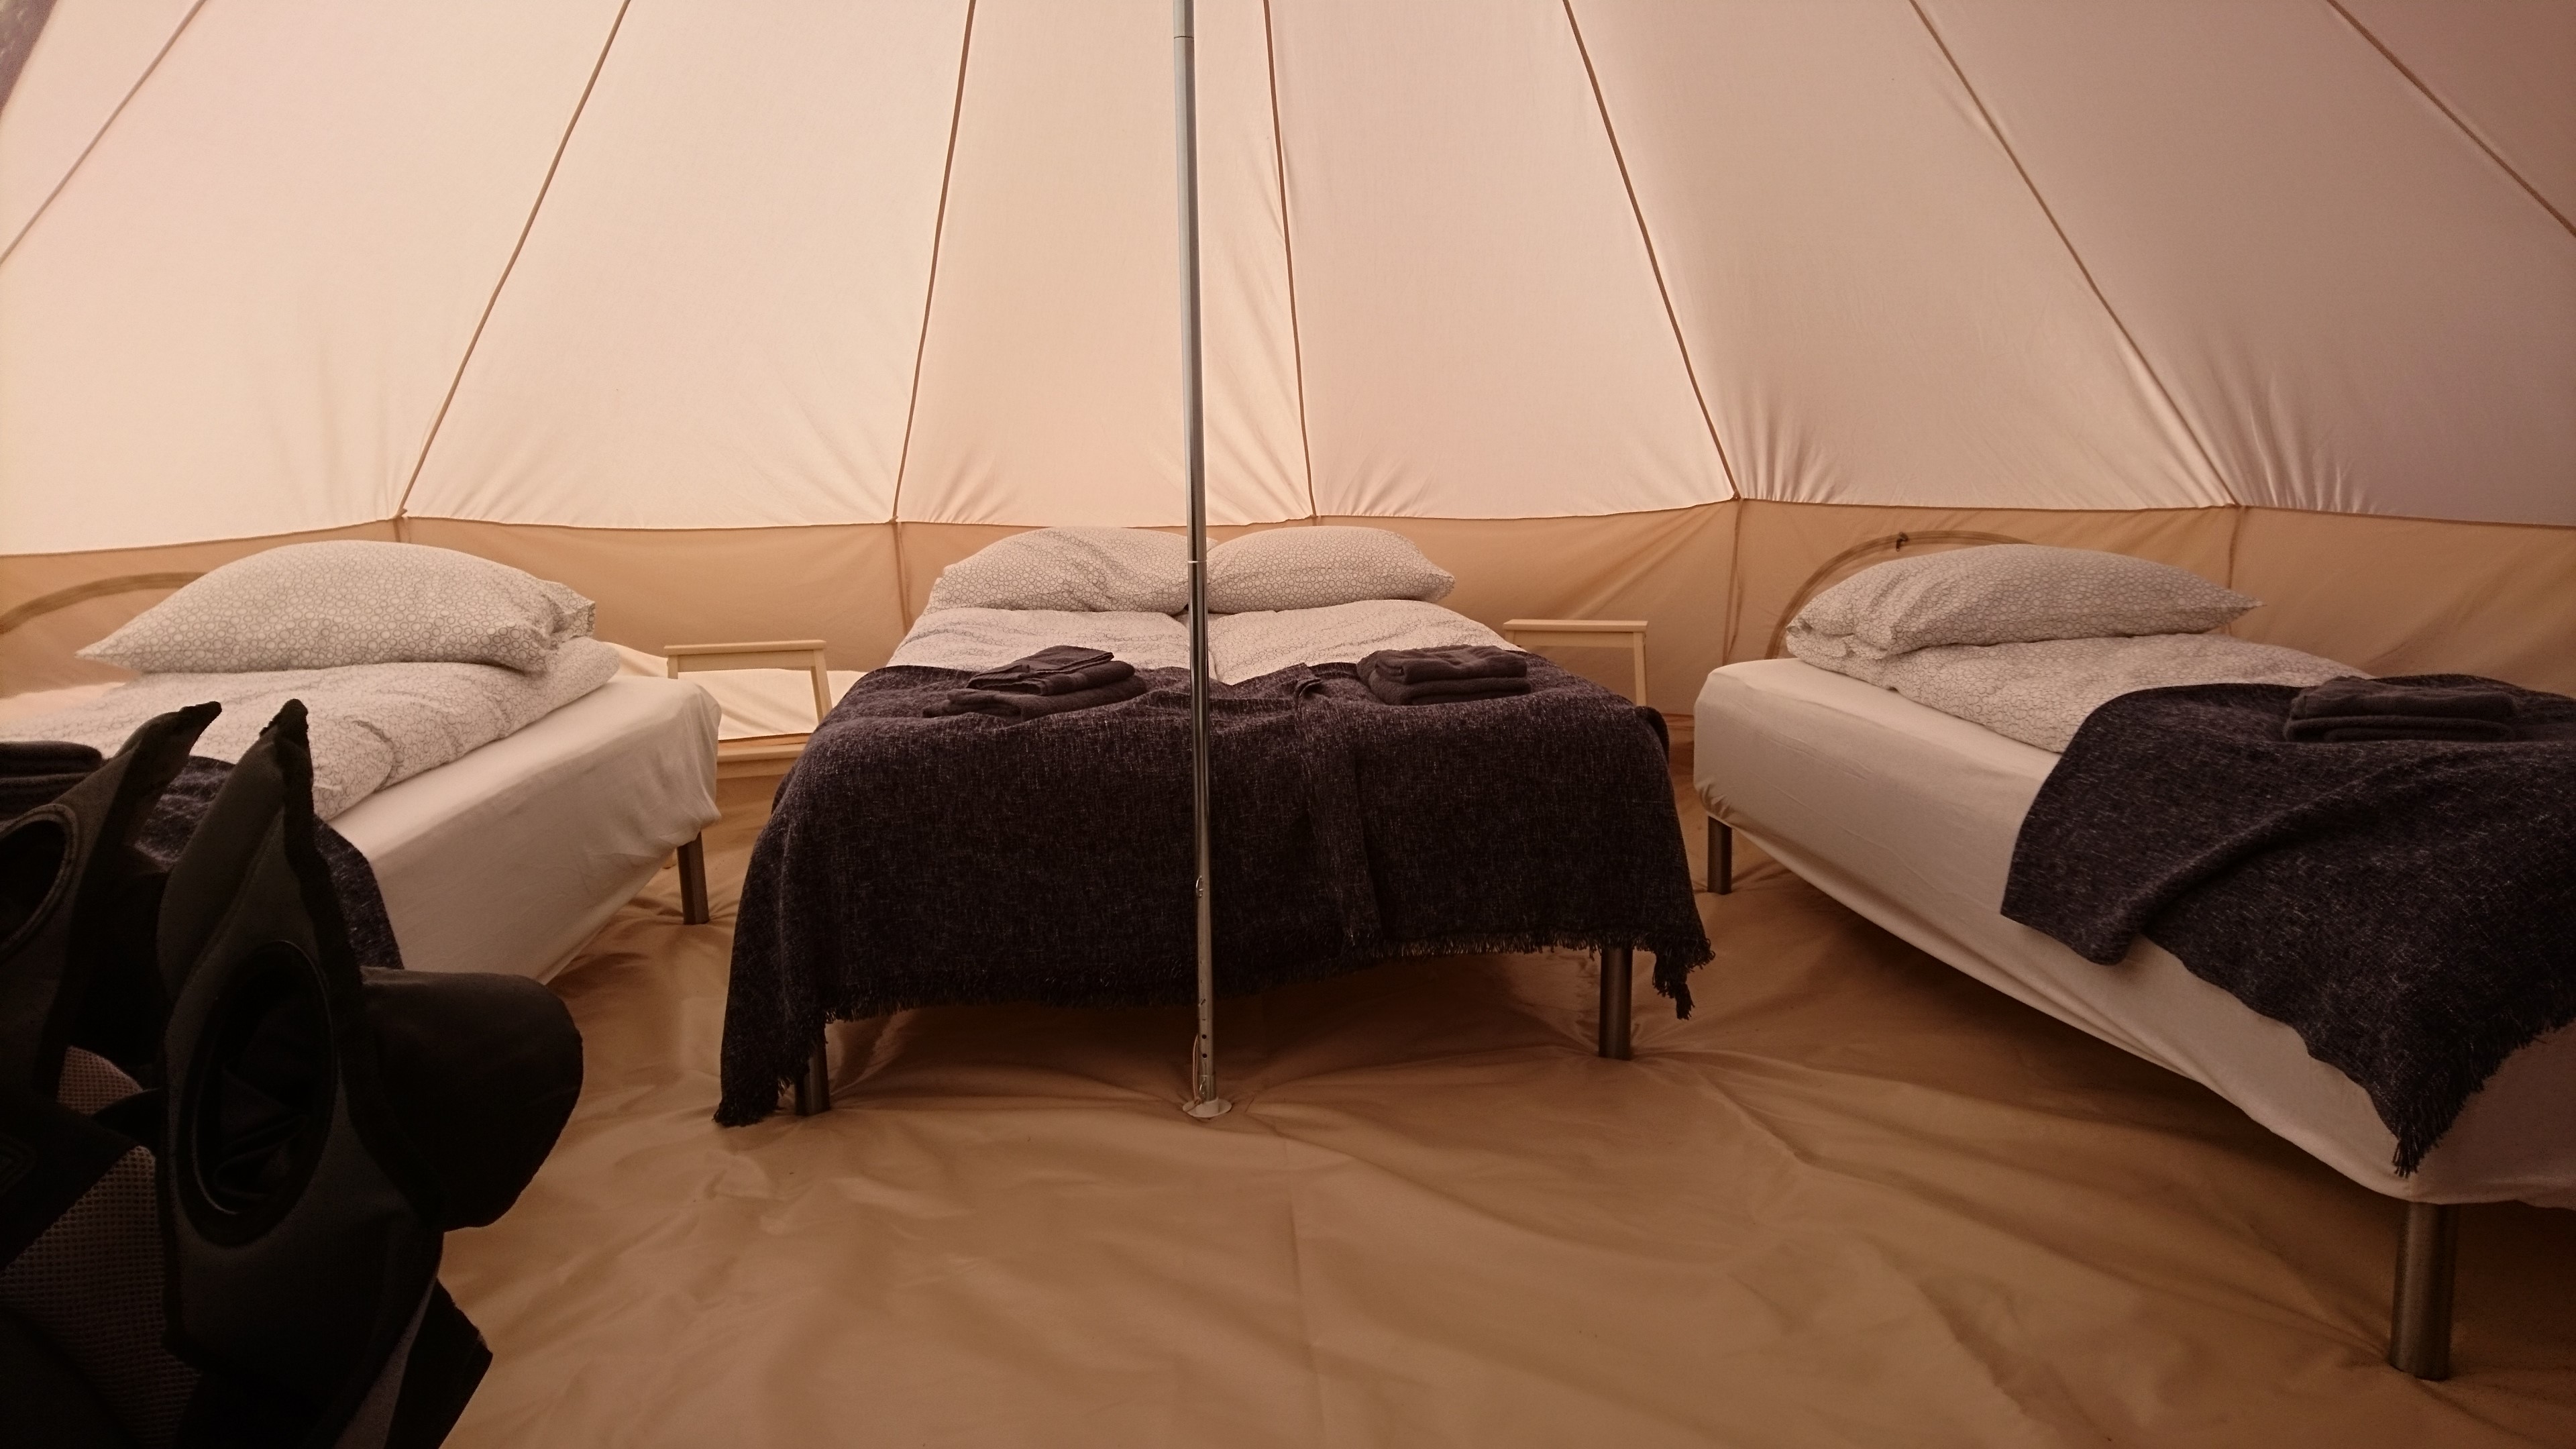 Glamping for 4 - right in the middle of nature